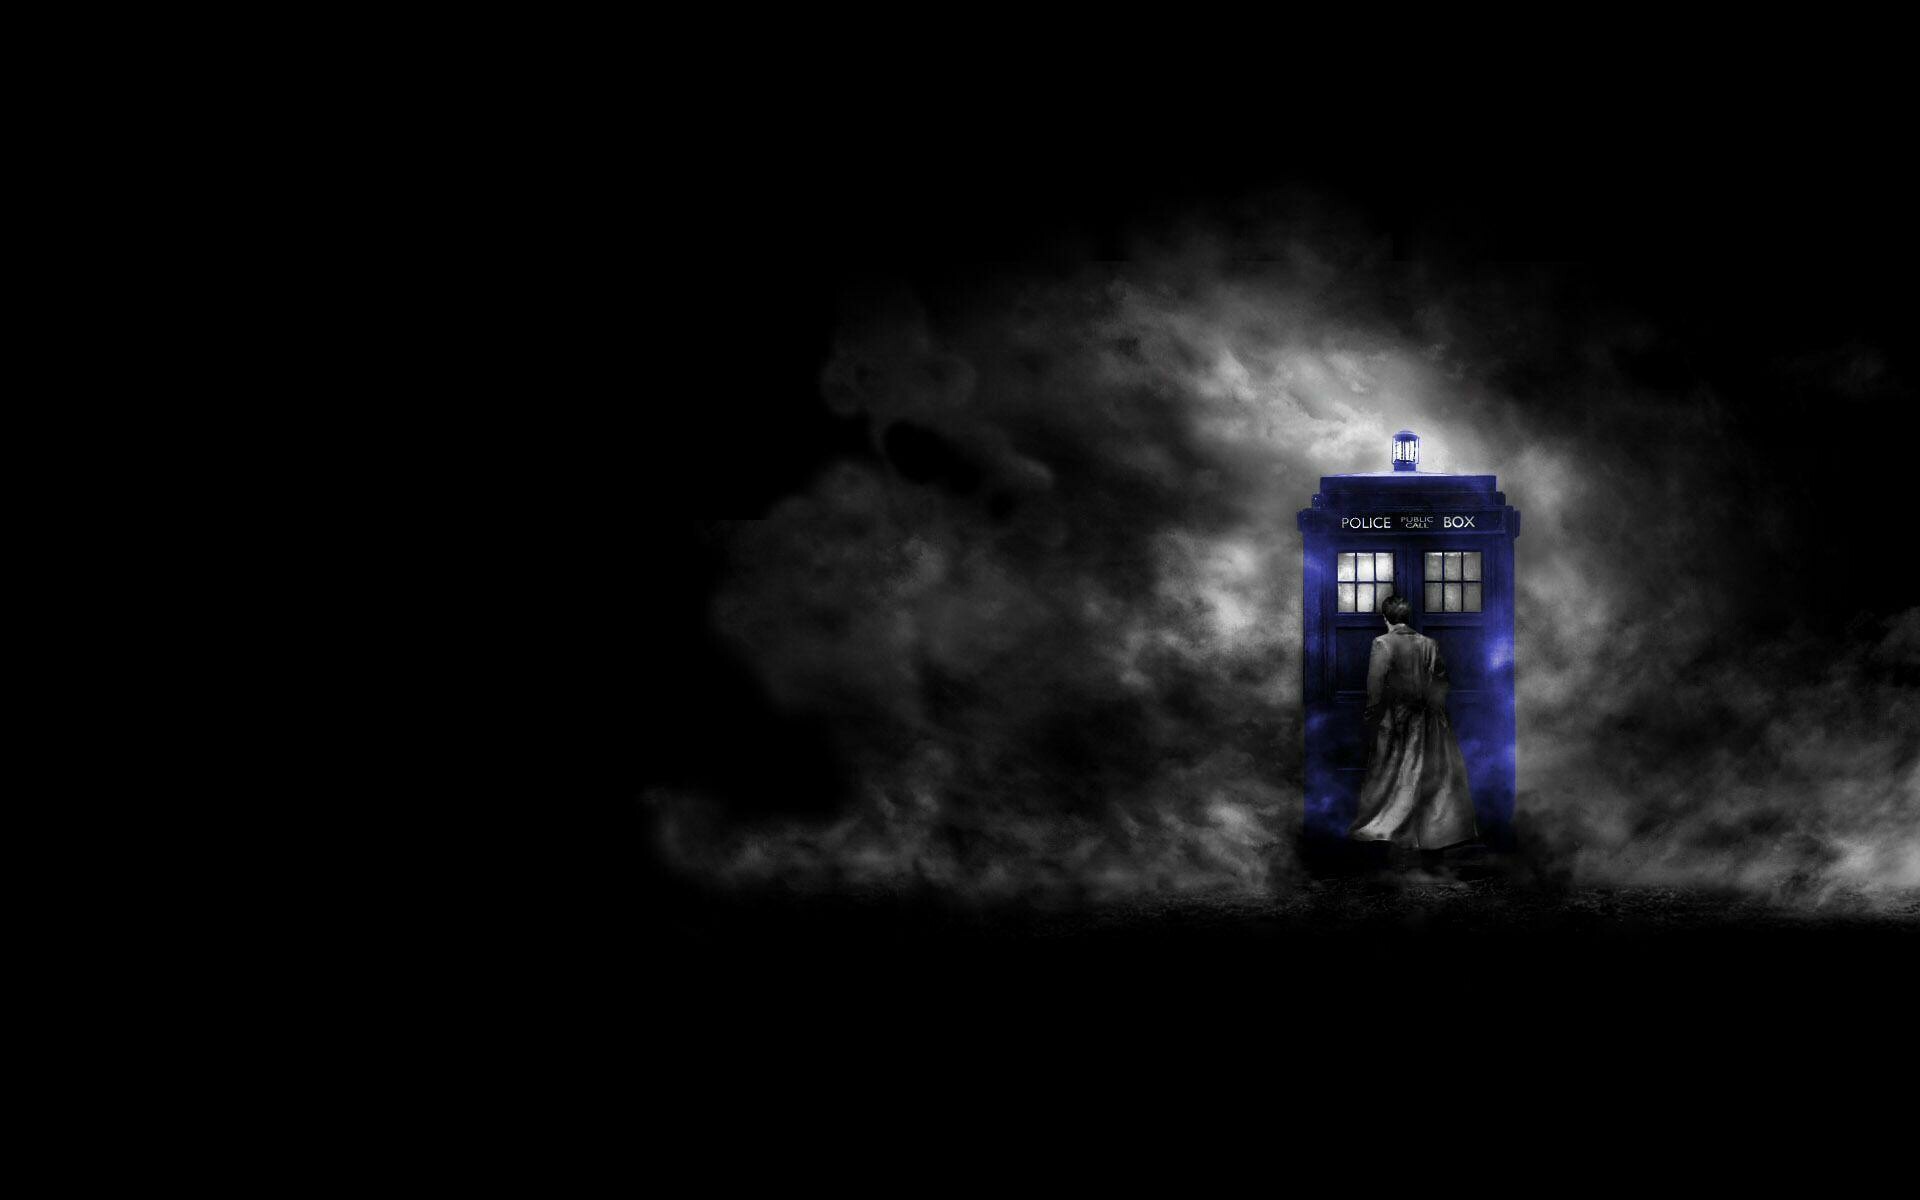 Doctor Who: With various companions, the Doctor combats foes, works to save civilizations, and helps people in need. 1920x1200 HD Background.